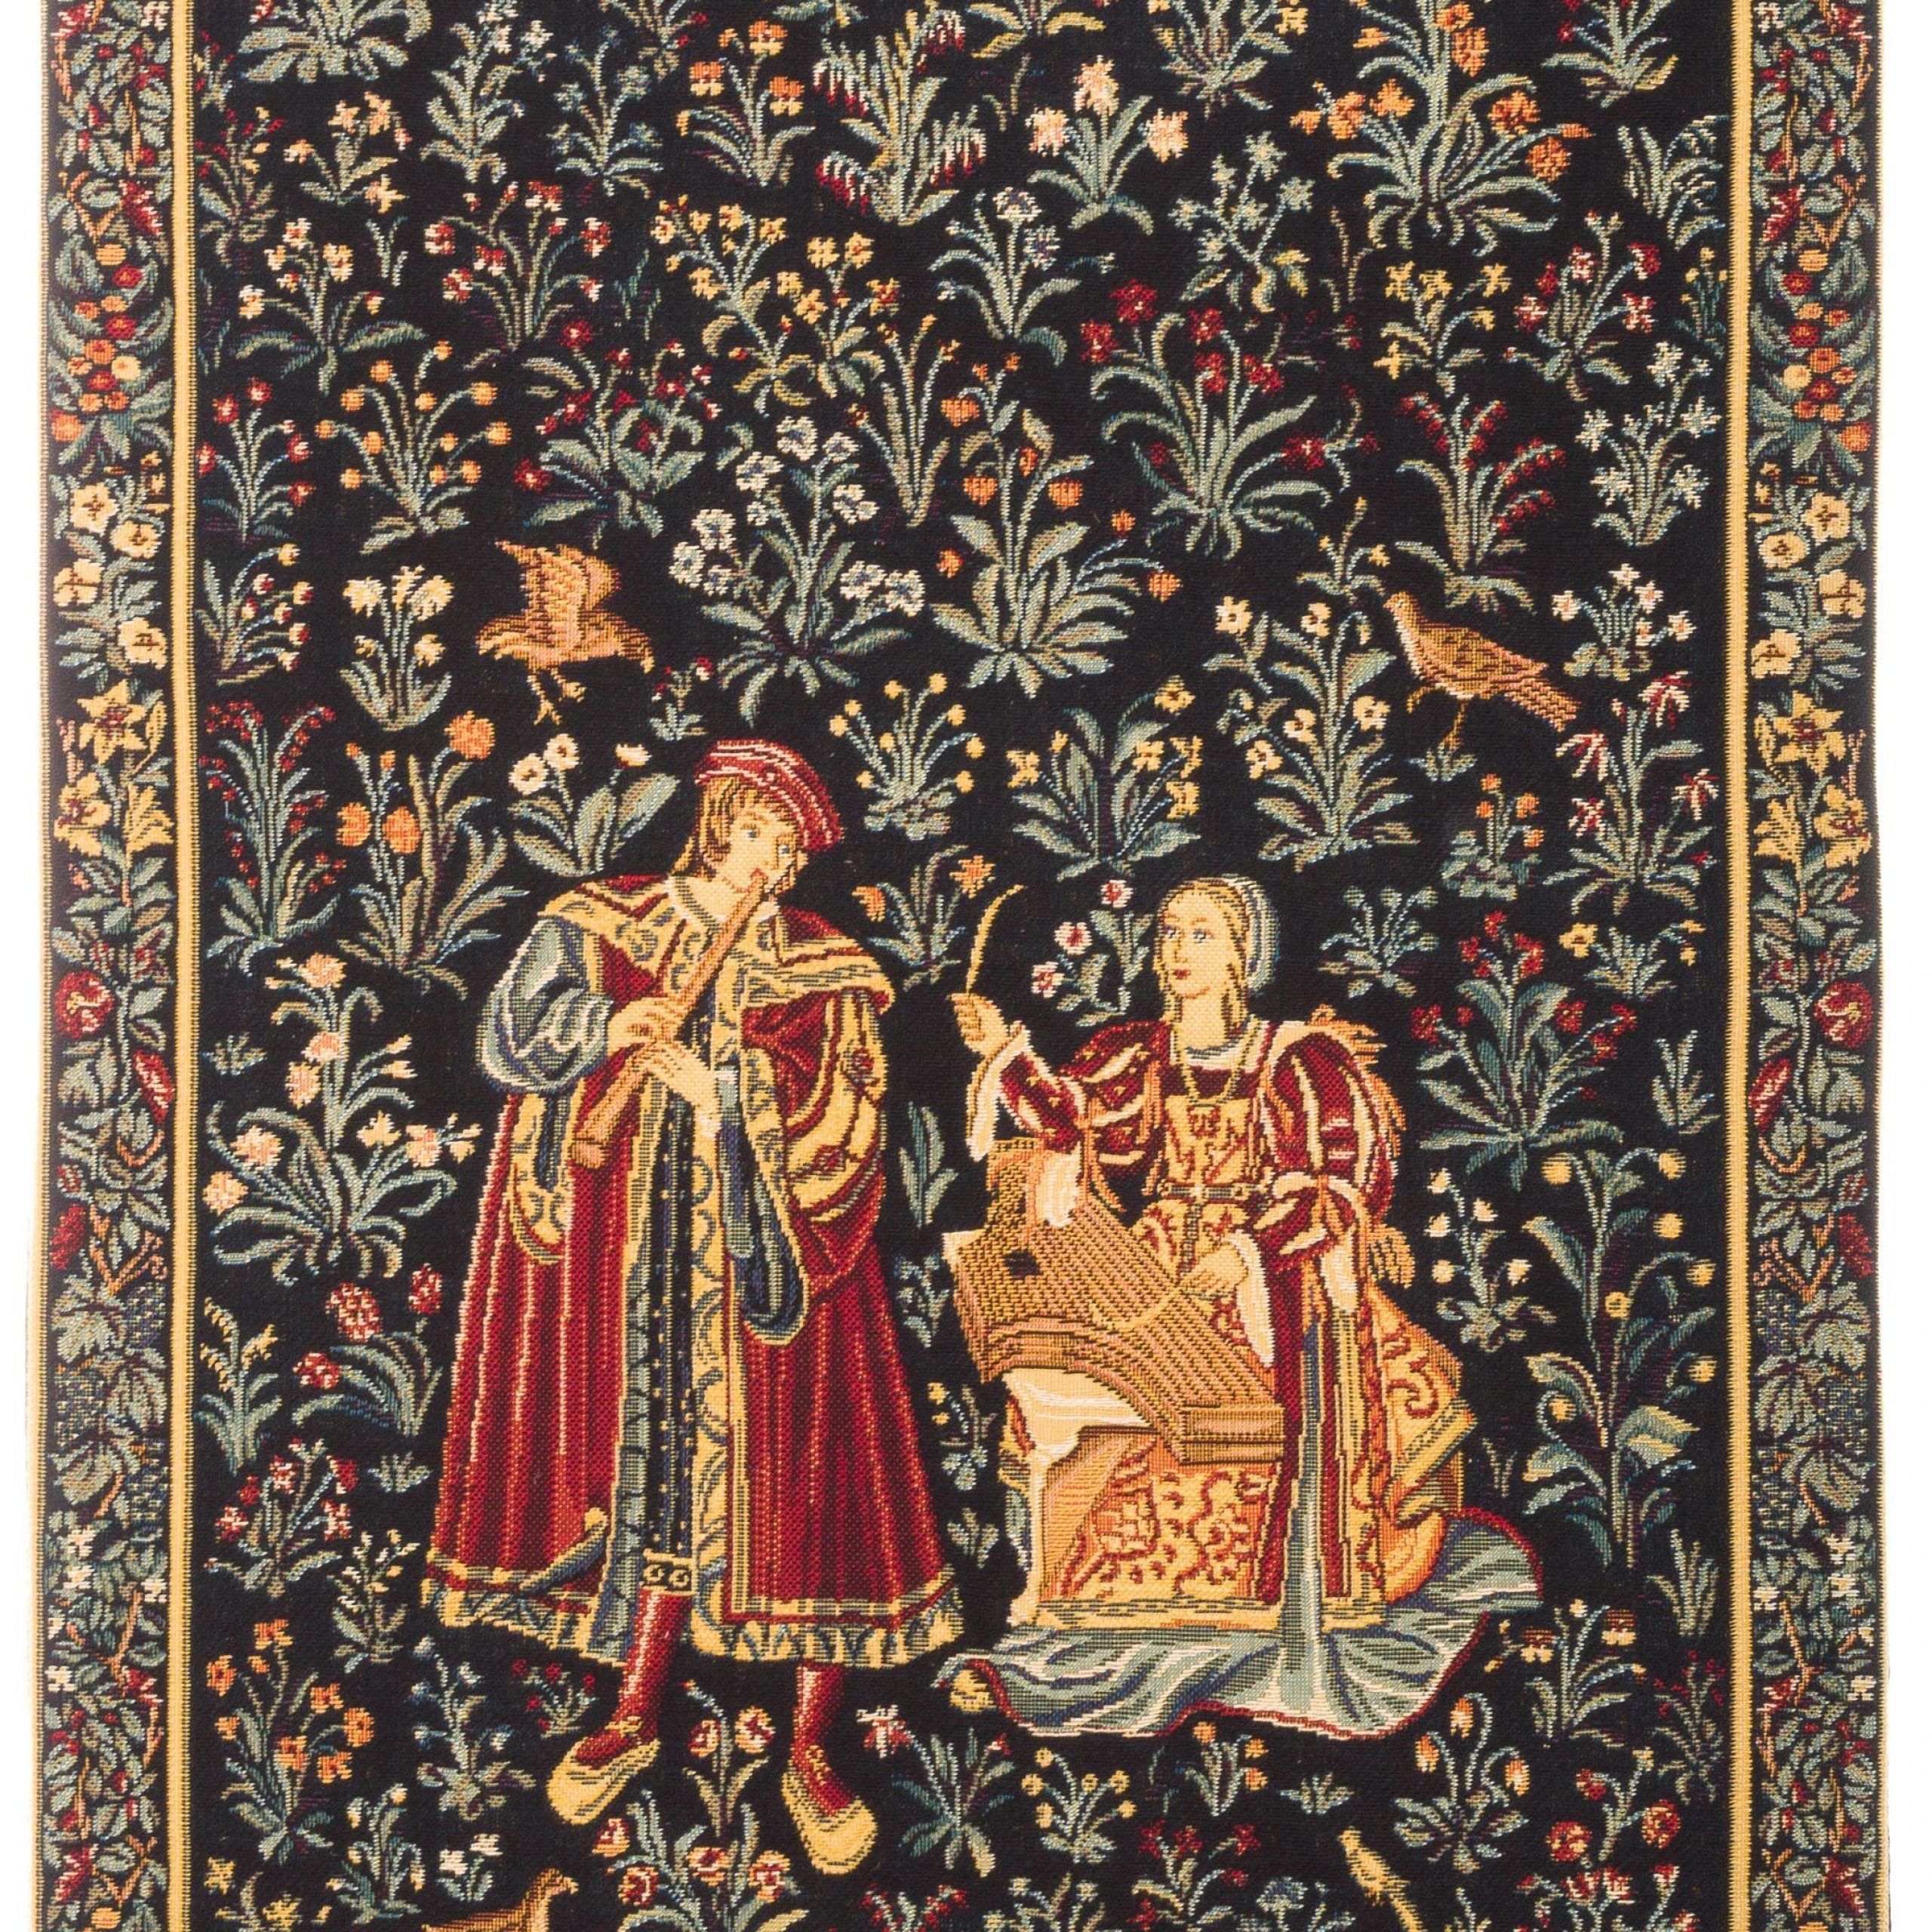 Medieval Tapestry Wall Hanging Concert Scene Millefleurs Within Newest Blended Fabric Wall Hangings With Rod Included (Gallery 20 of 20)